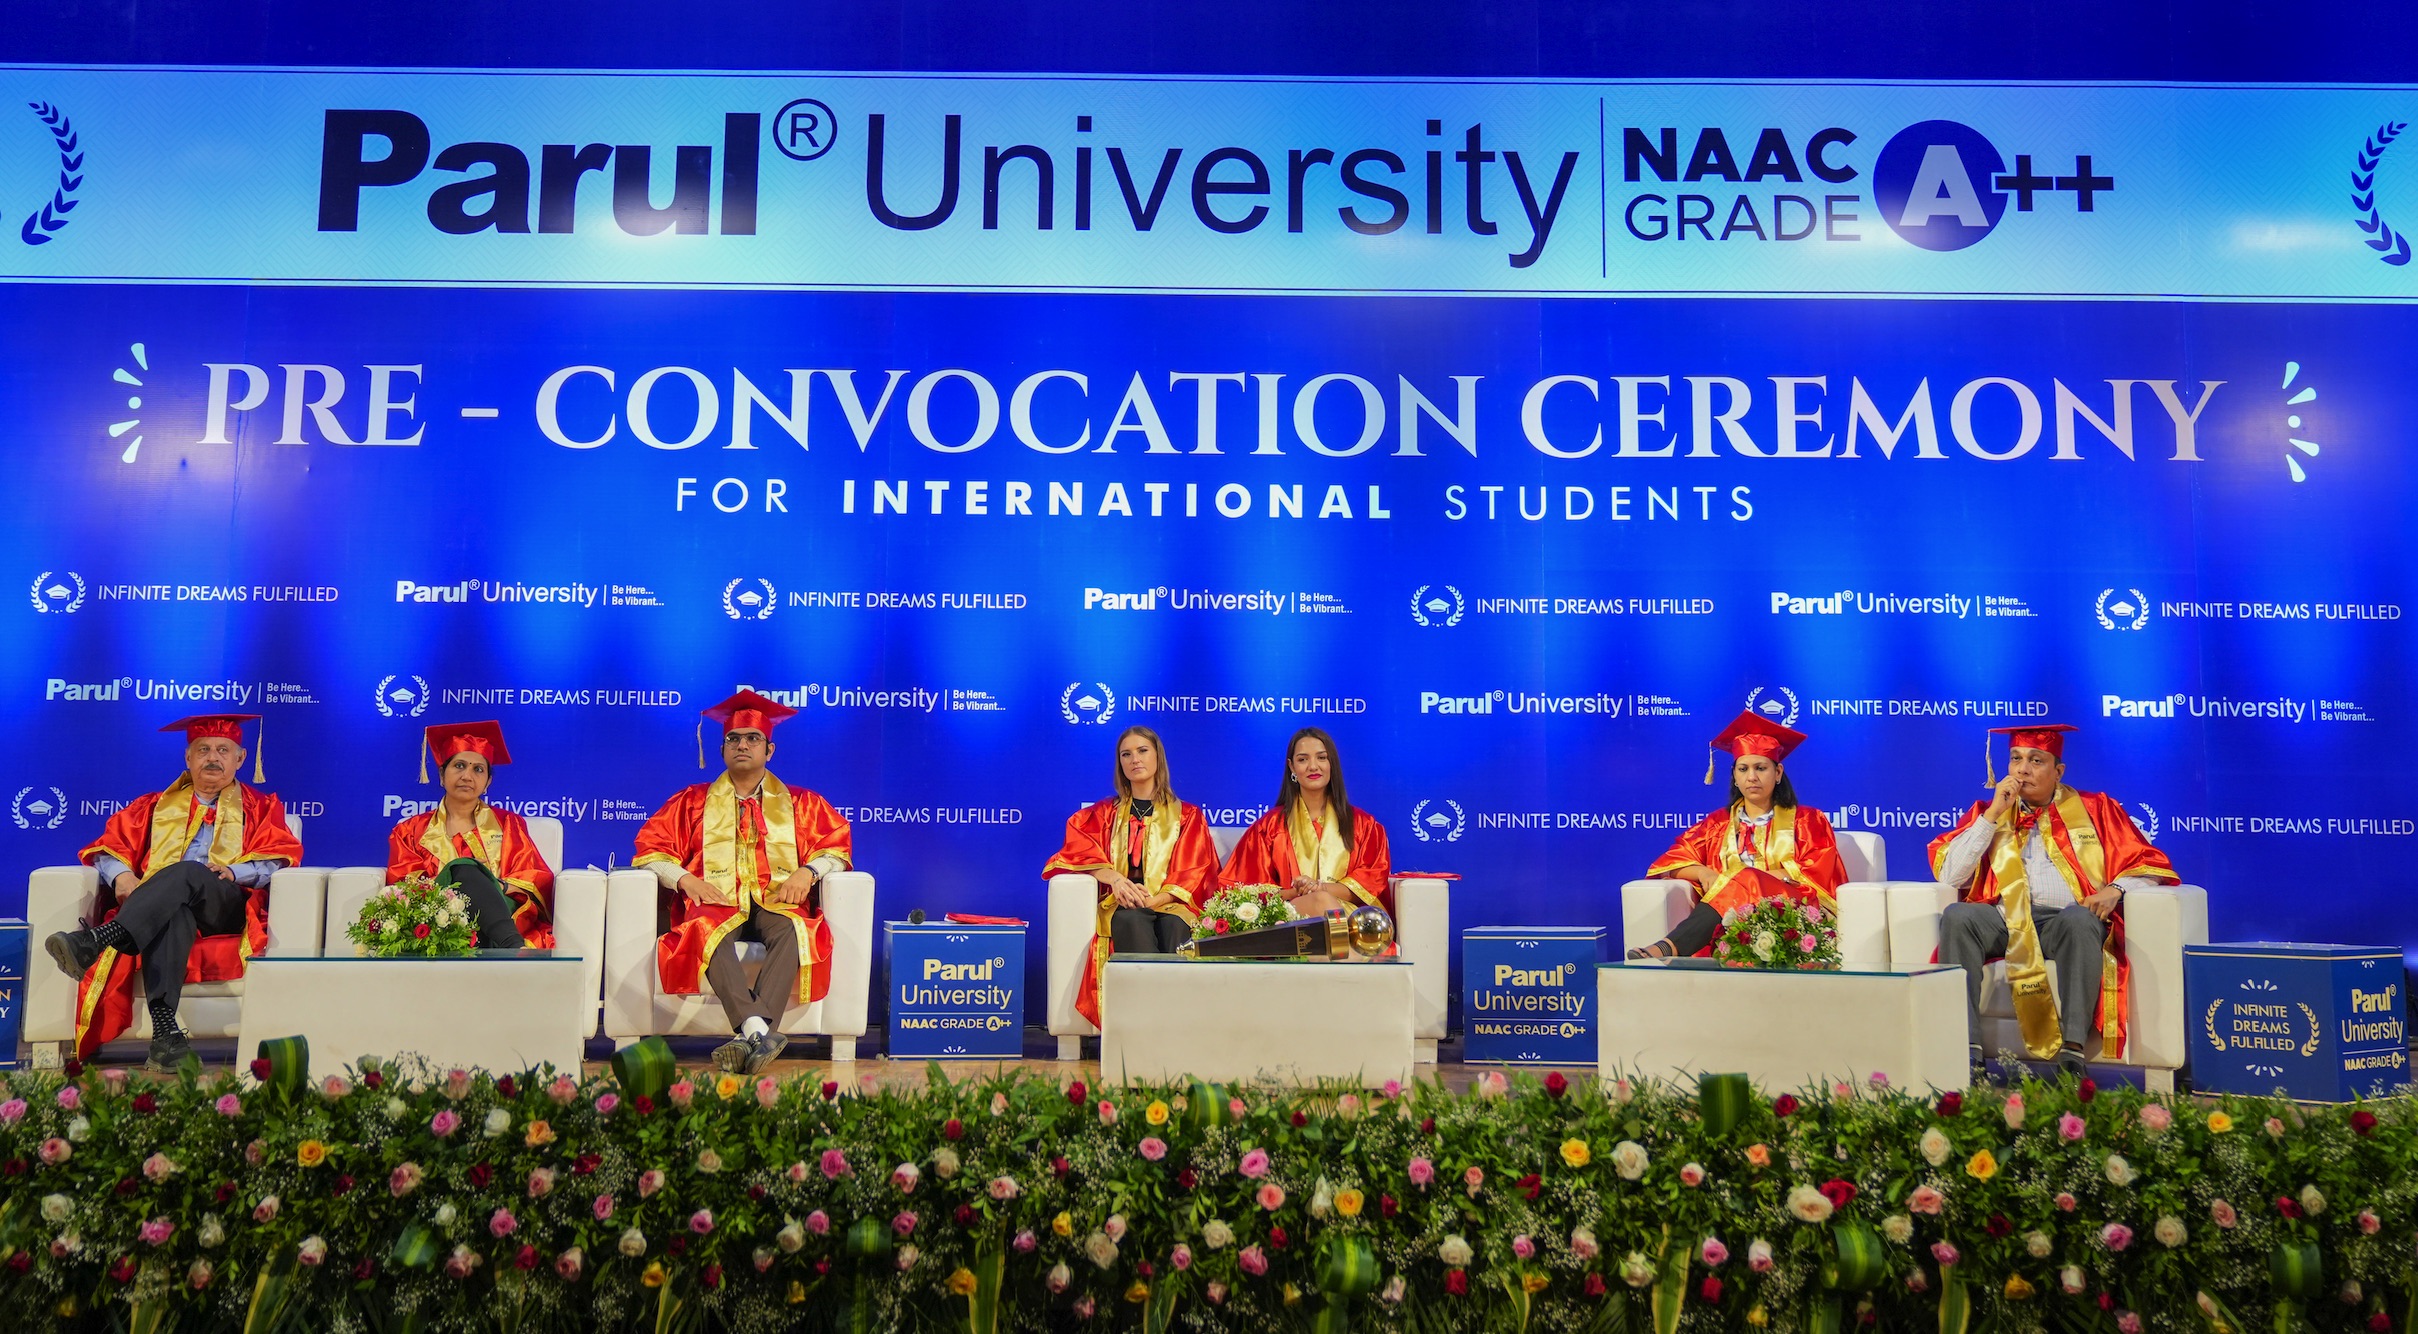 PU’s International Students, All Set To Make A Difference In The World As the University Hosts its Pre-Convocation Ceremony in the Presence of Global Icons.